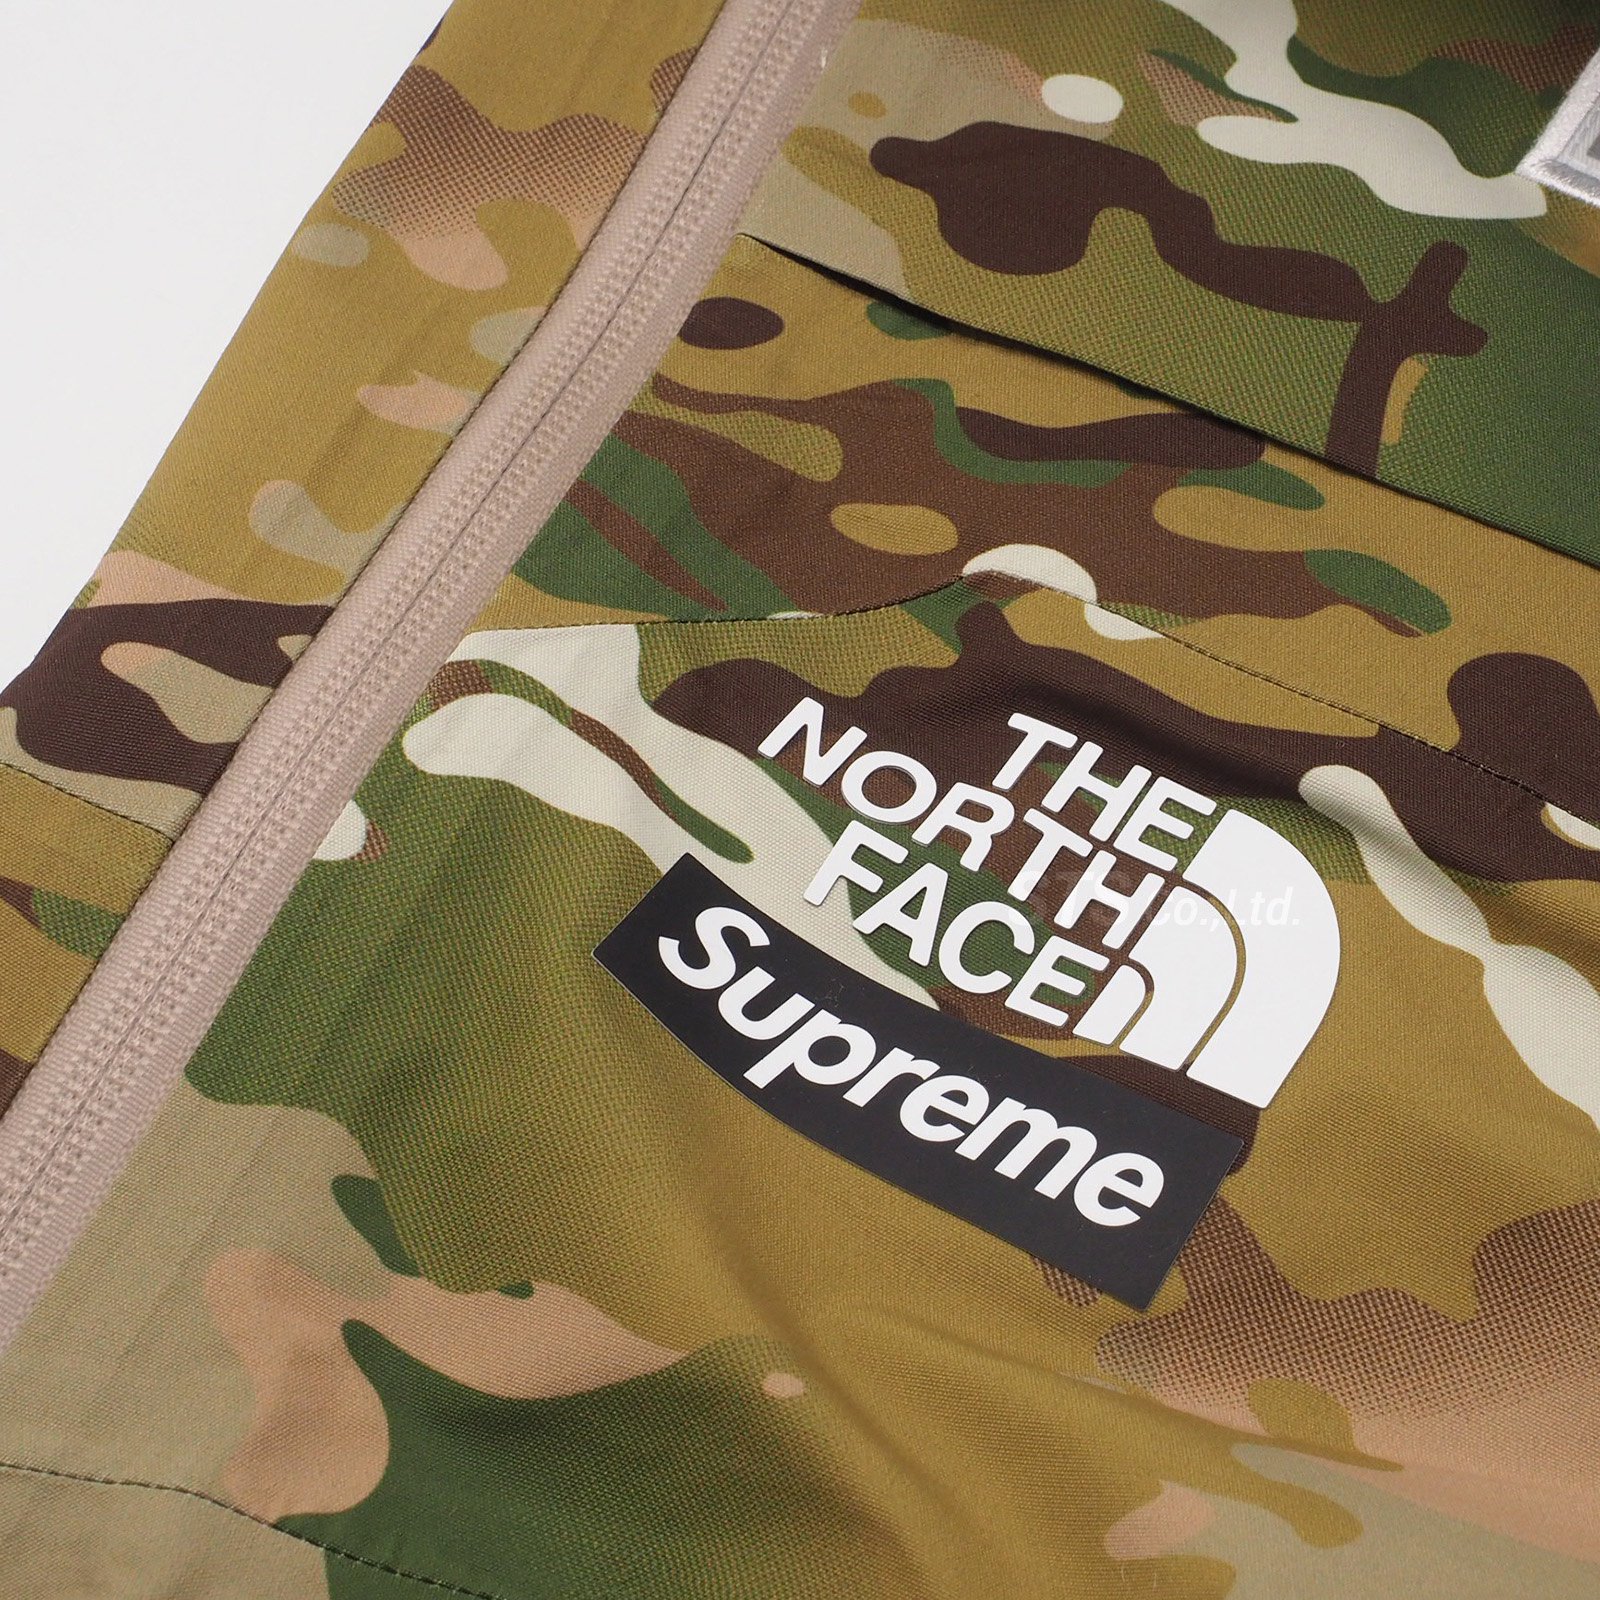 Supreme The North Face Summit Series Rescue Mountain Pants Multicam Large  SS22